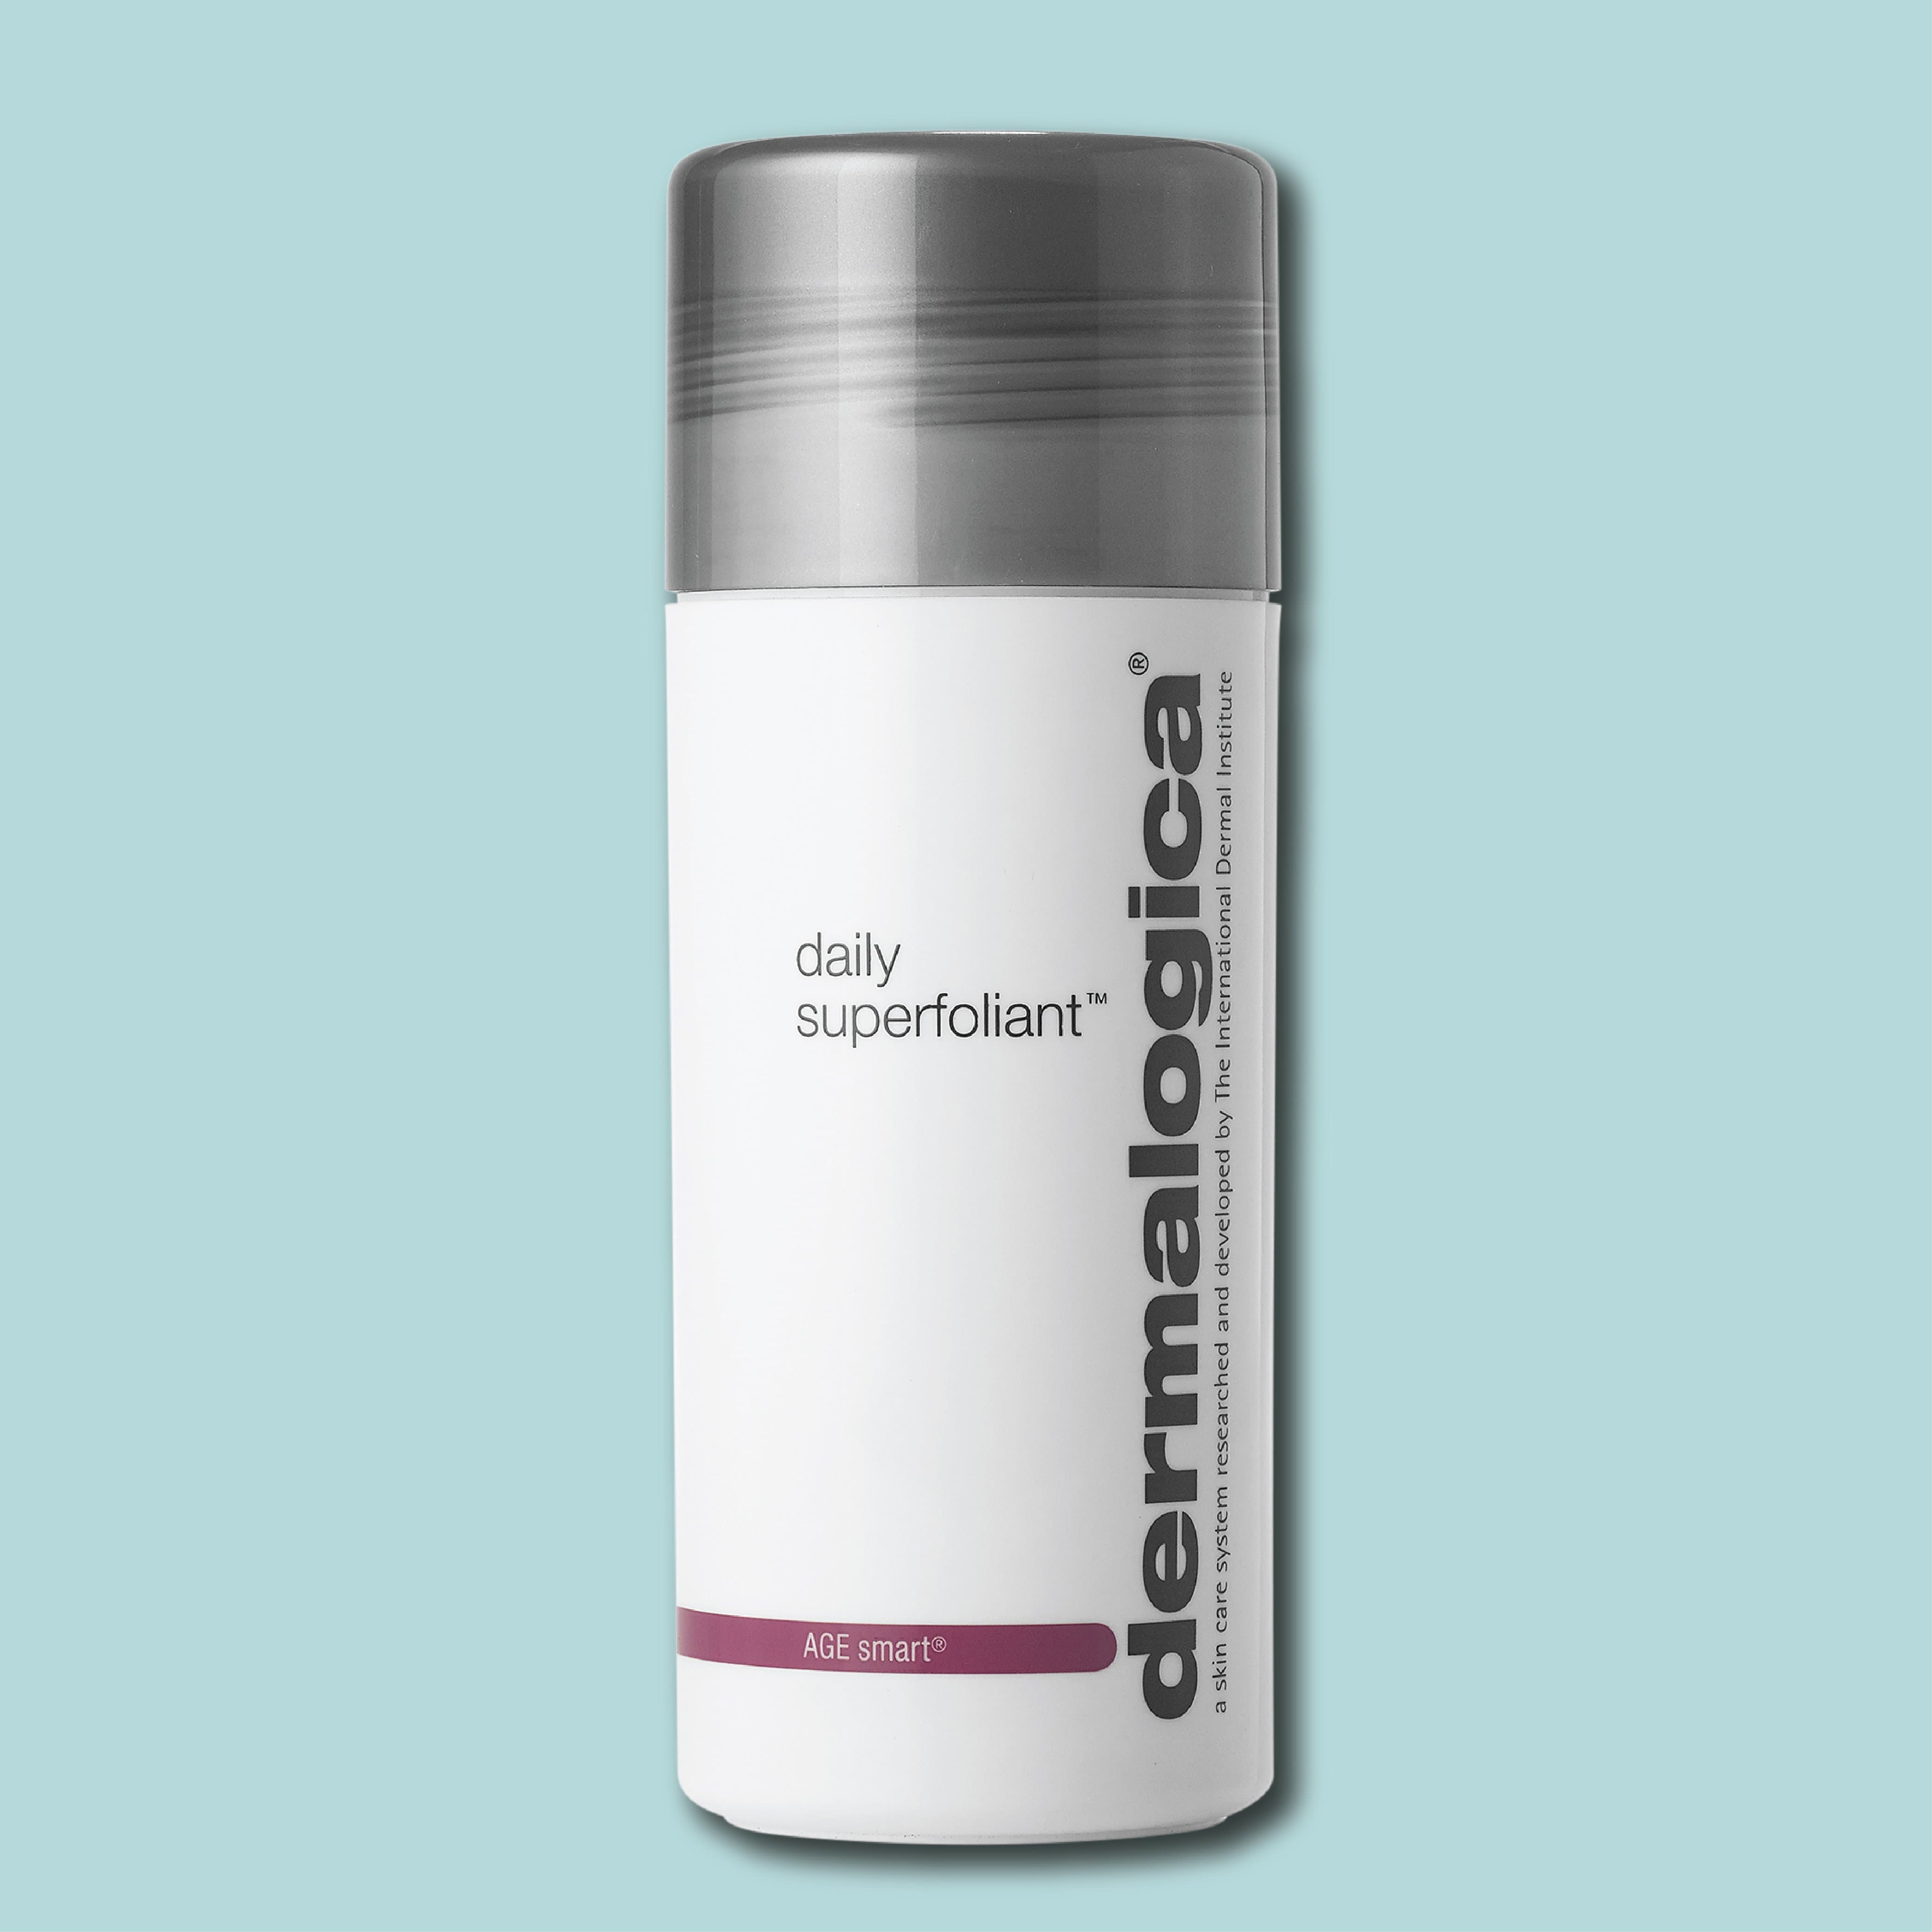 Dermalogica Daily Superfoliant - Deep Pore Face Scrub - Powder Exfoliator that Gently Smoothes and Brightens Skin Fighting Triggers Known To Accelerate Skin Aging 2 Ounce (Pack of 1)